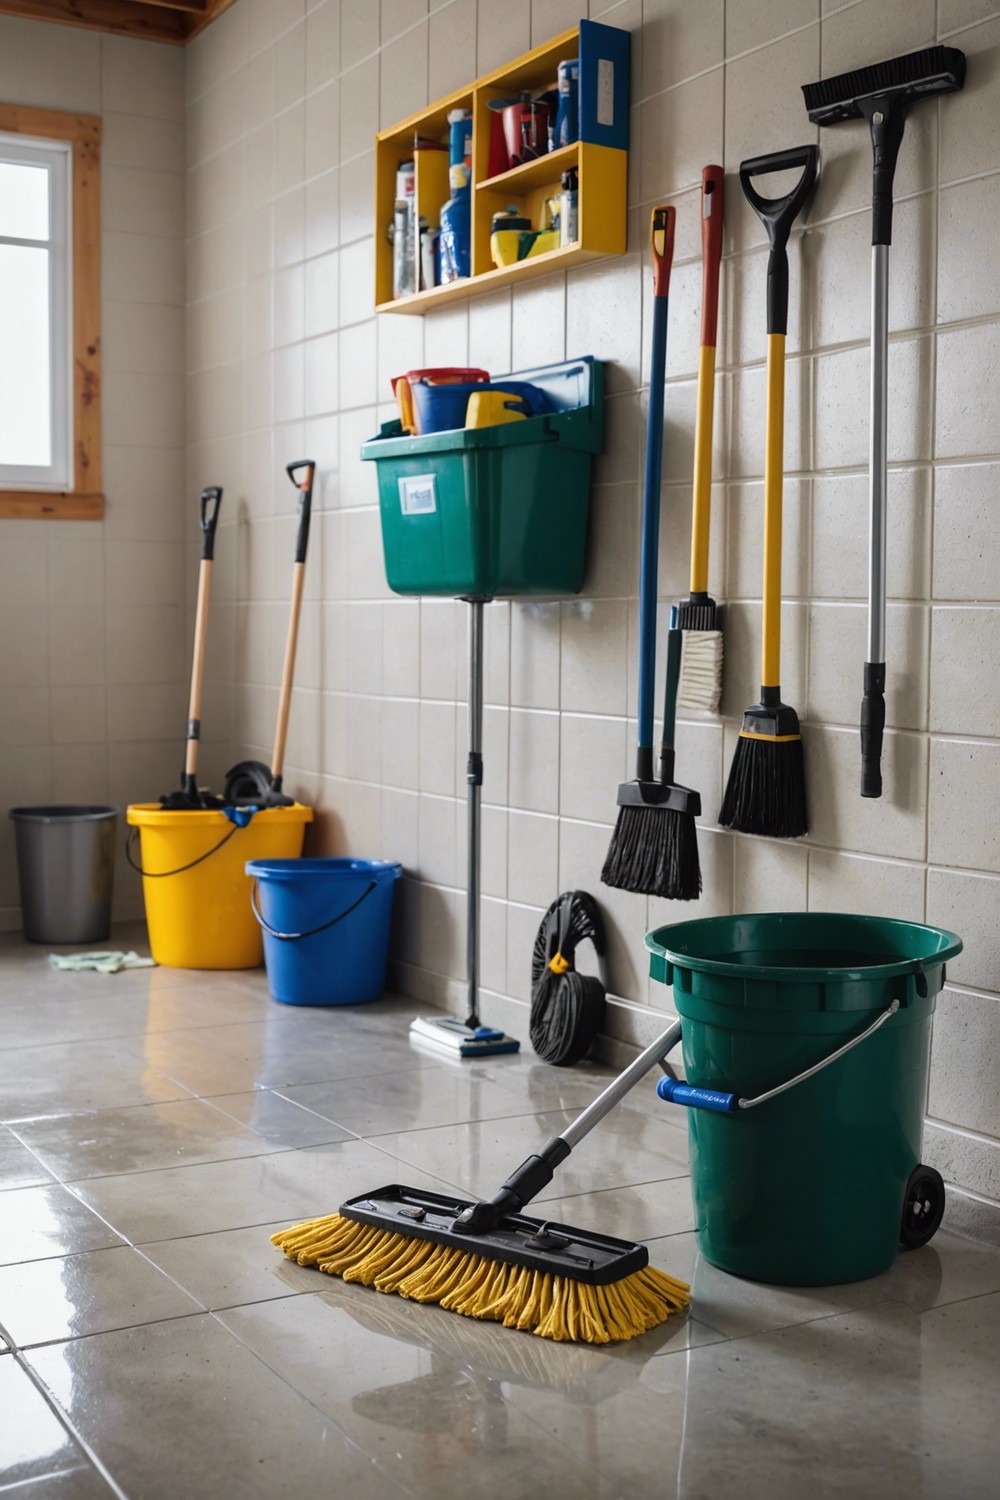 Ceramic Tiles: Easy to Clean and Maintain